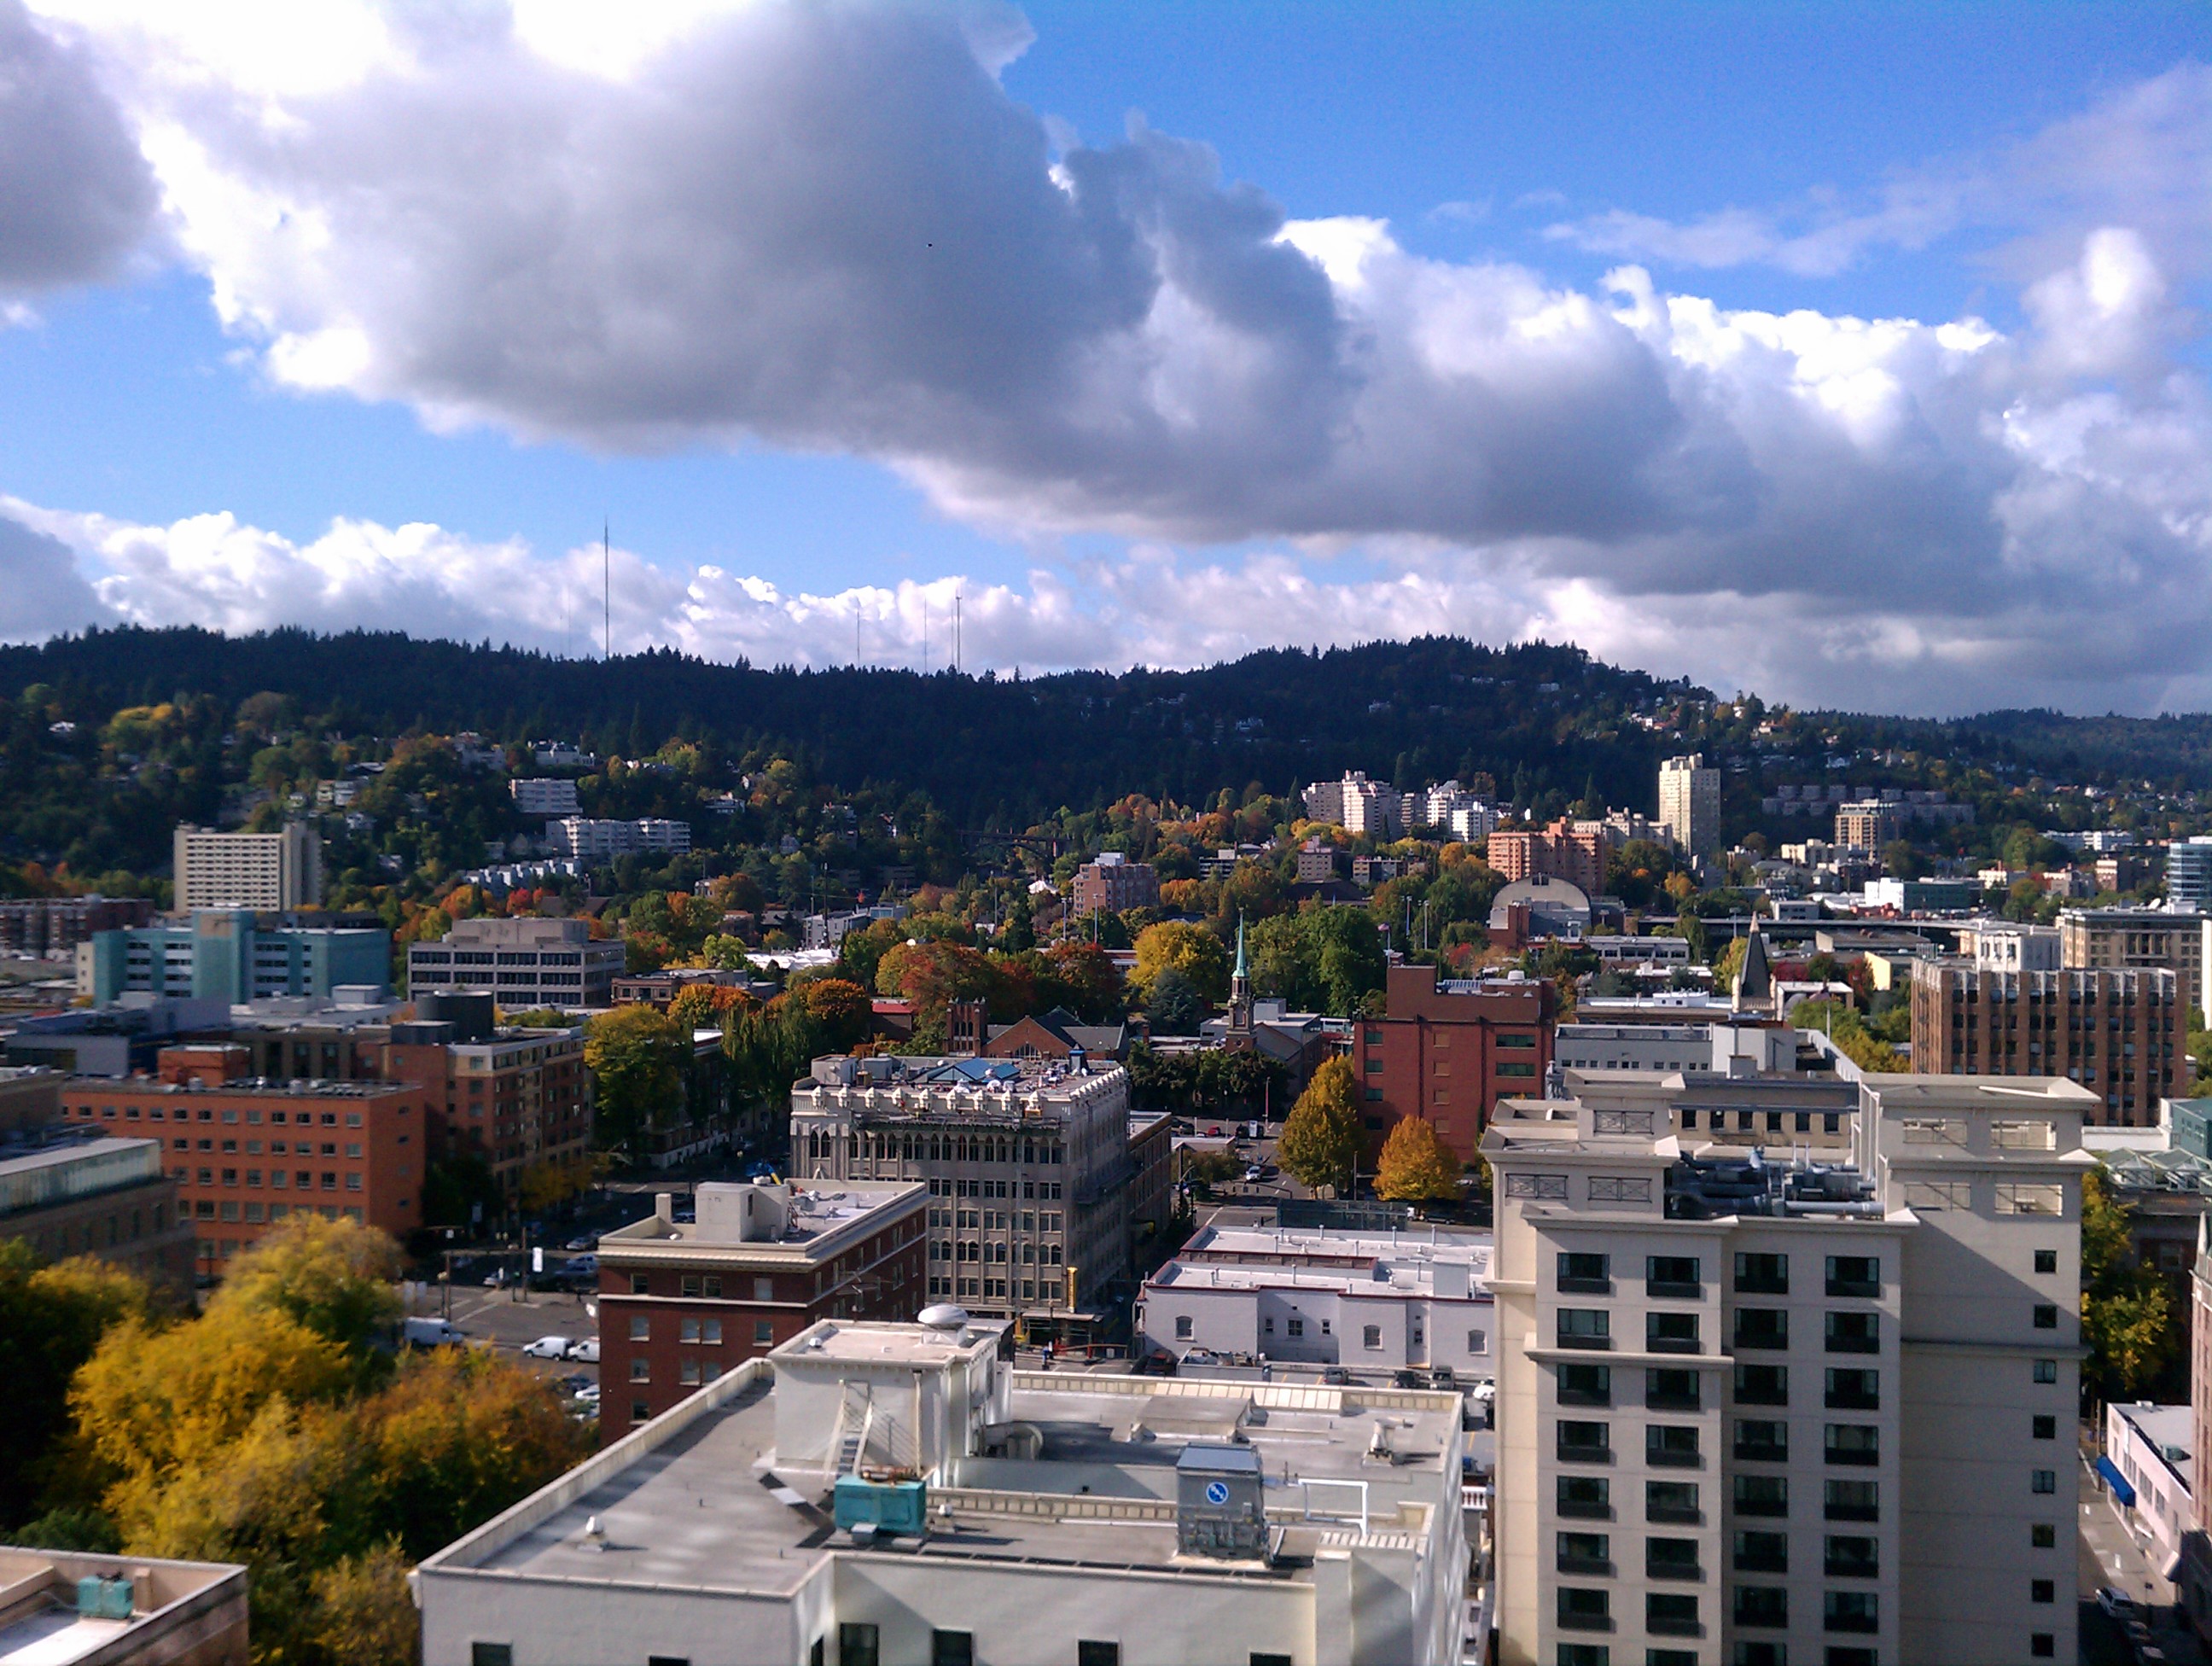 Portland from the top of the Hilton, where the Educators' Symposium was held.